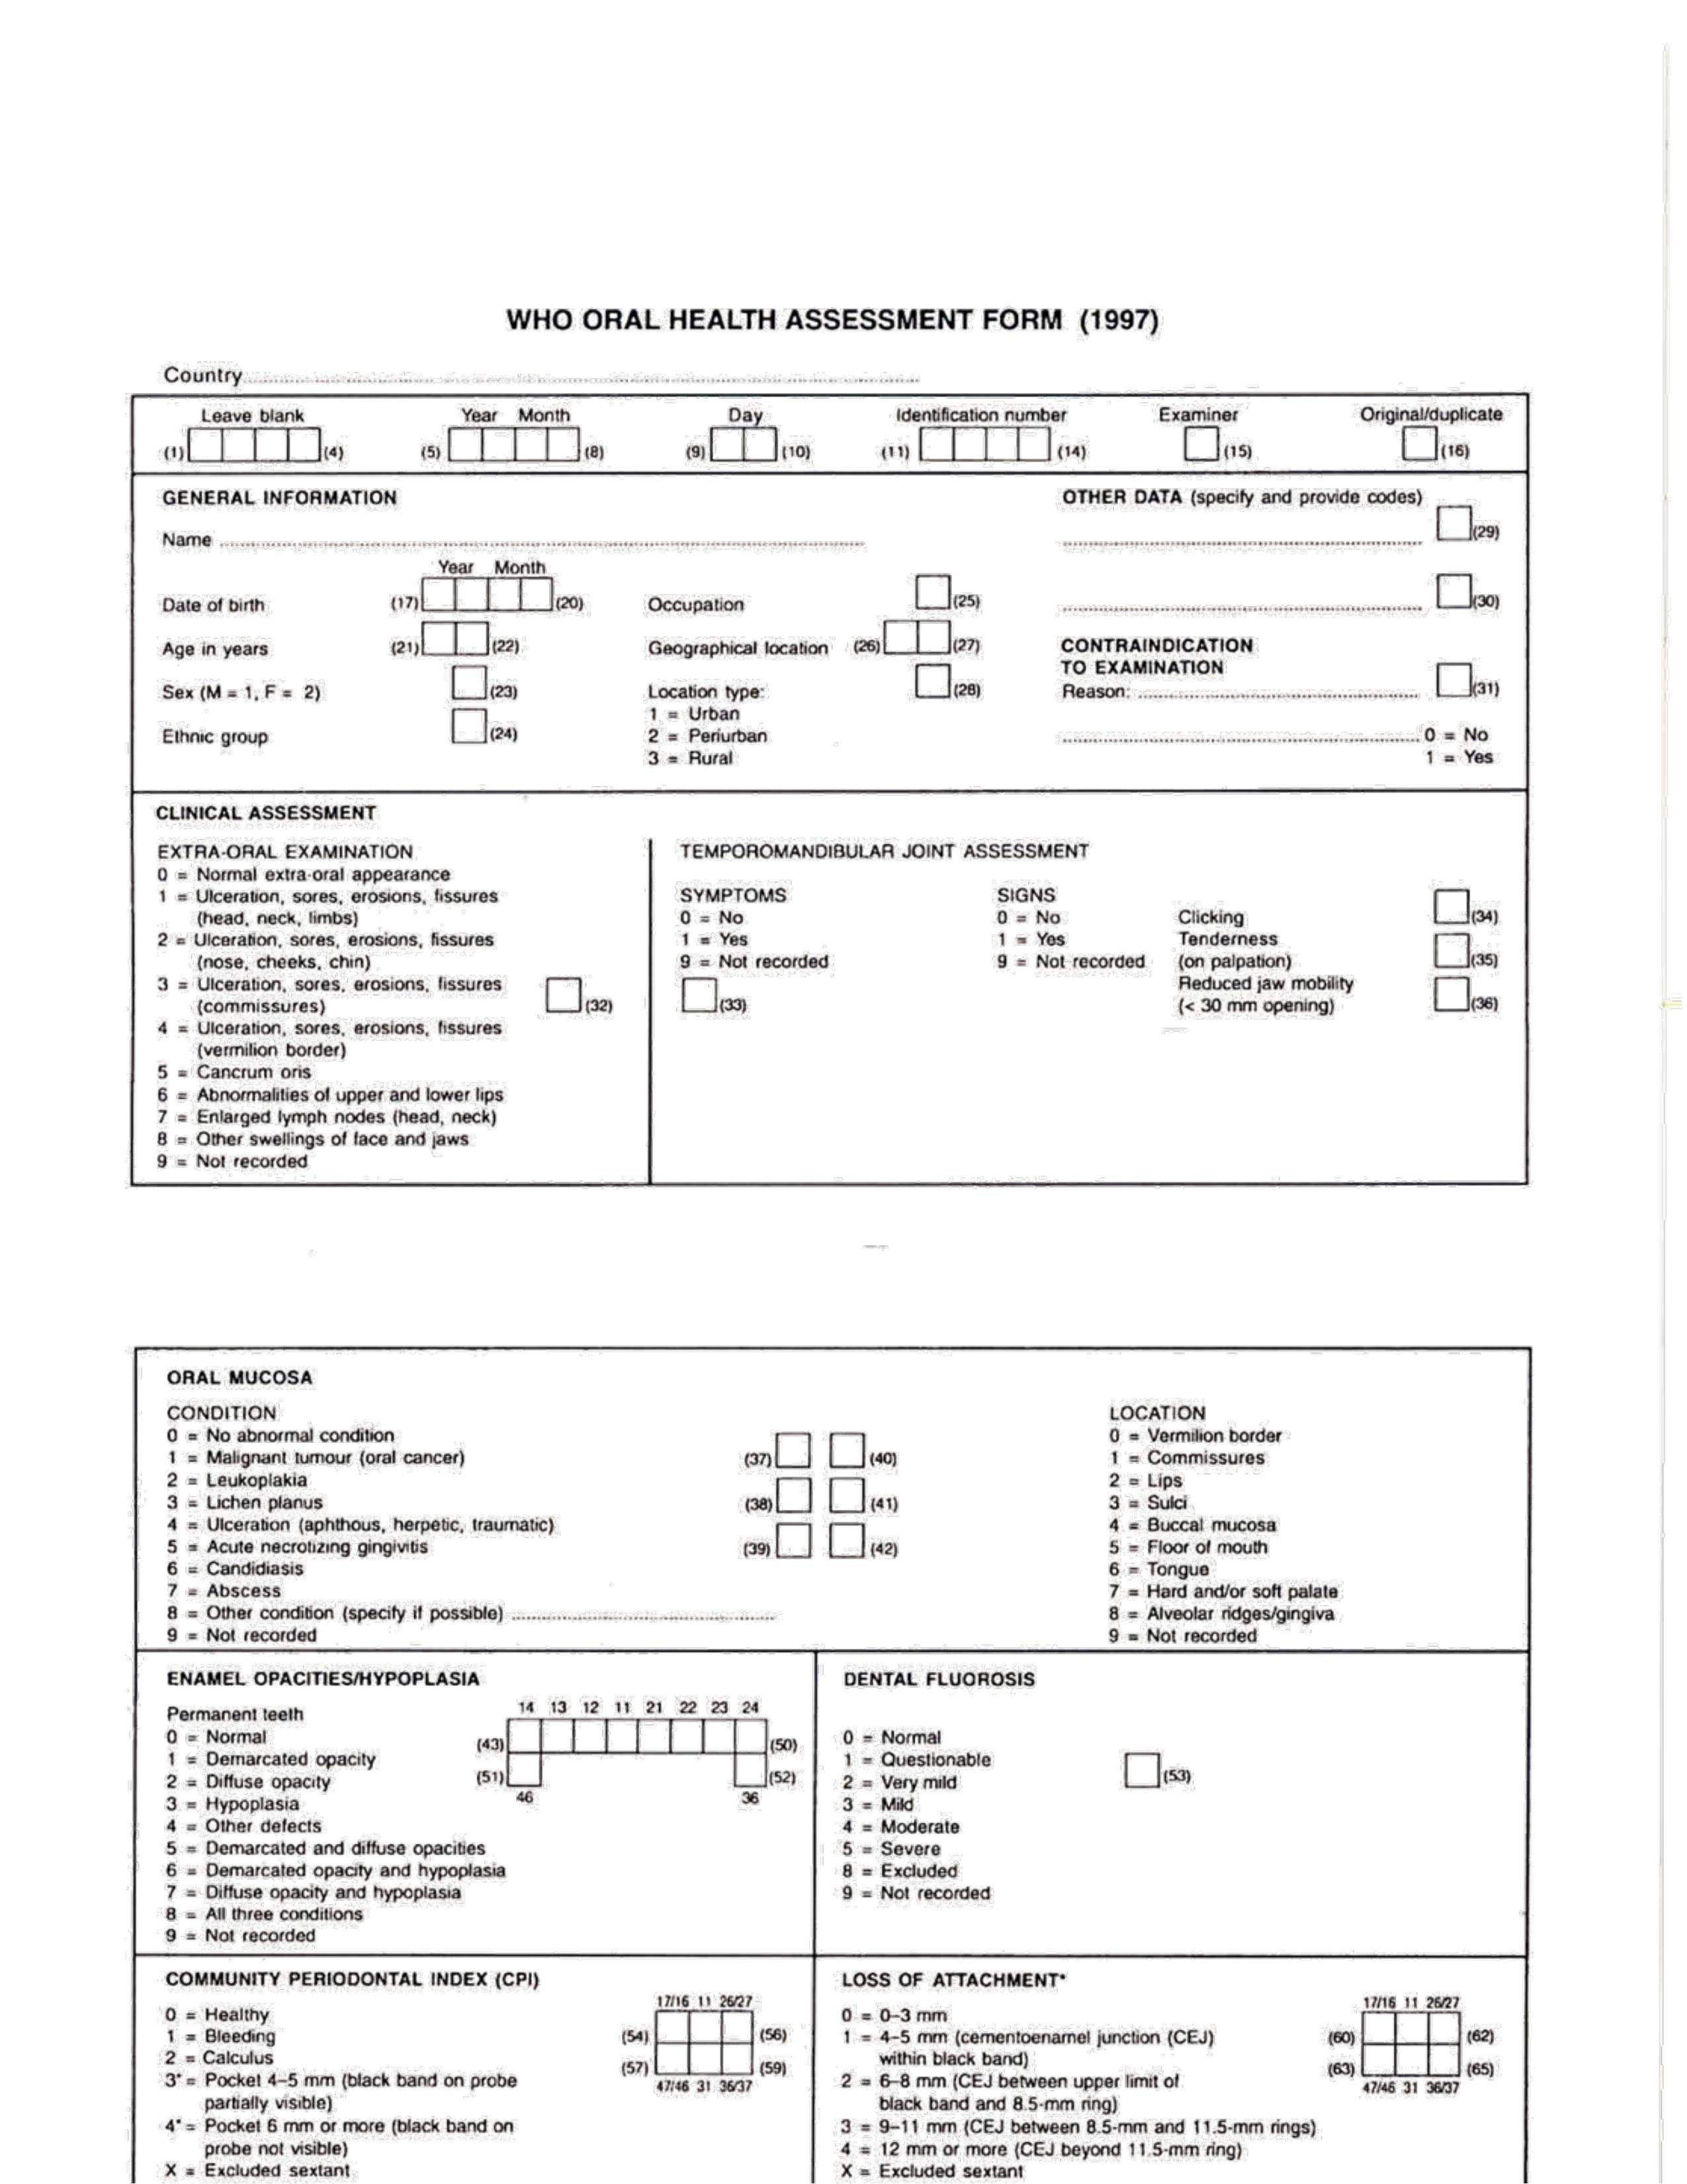 WHO ORAL HEALTH ASSESSMENT FORM 1997